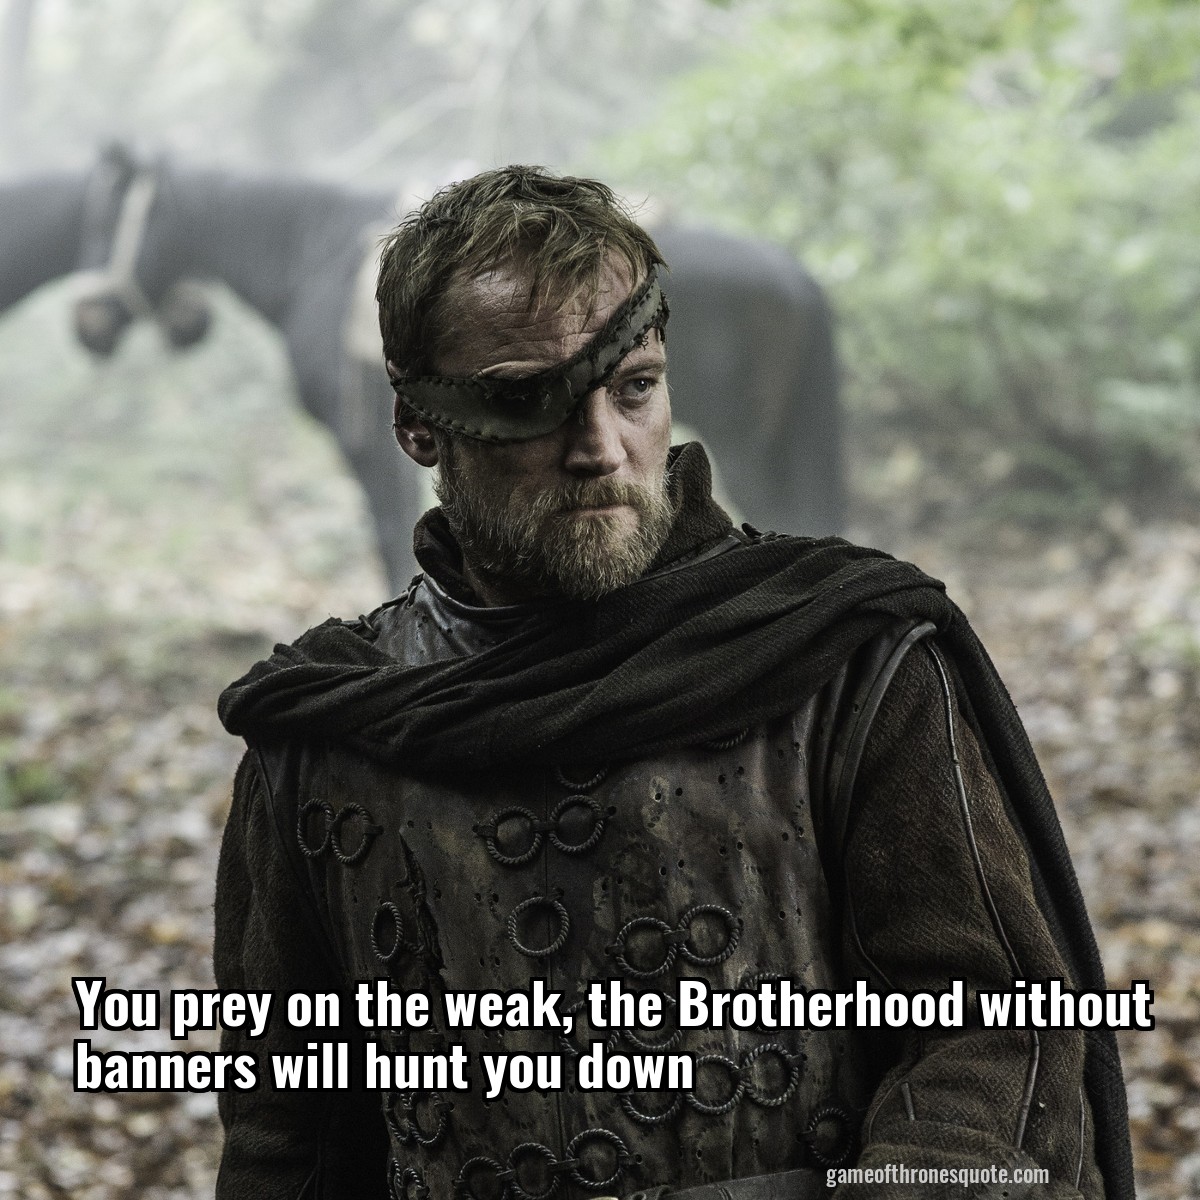 You prey on the weak, the Brotherhood without banners will hunt you down